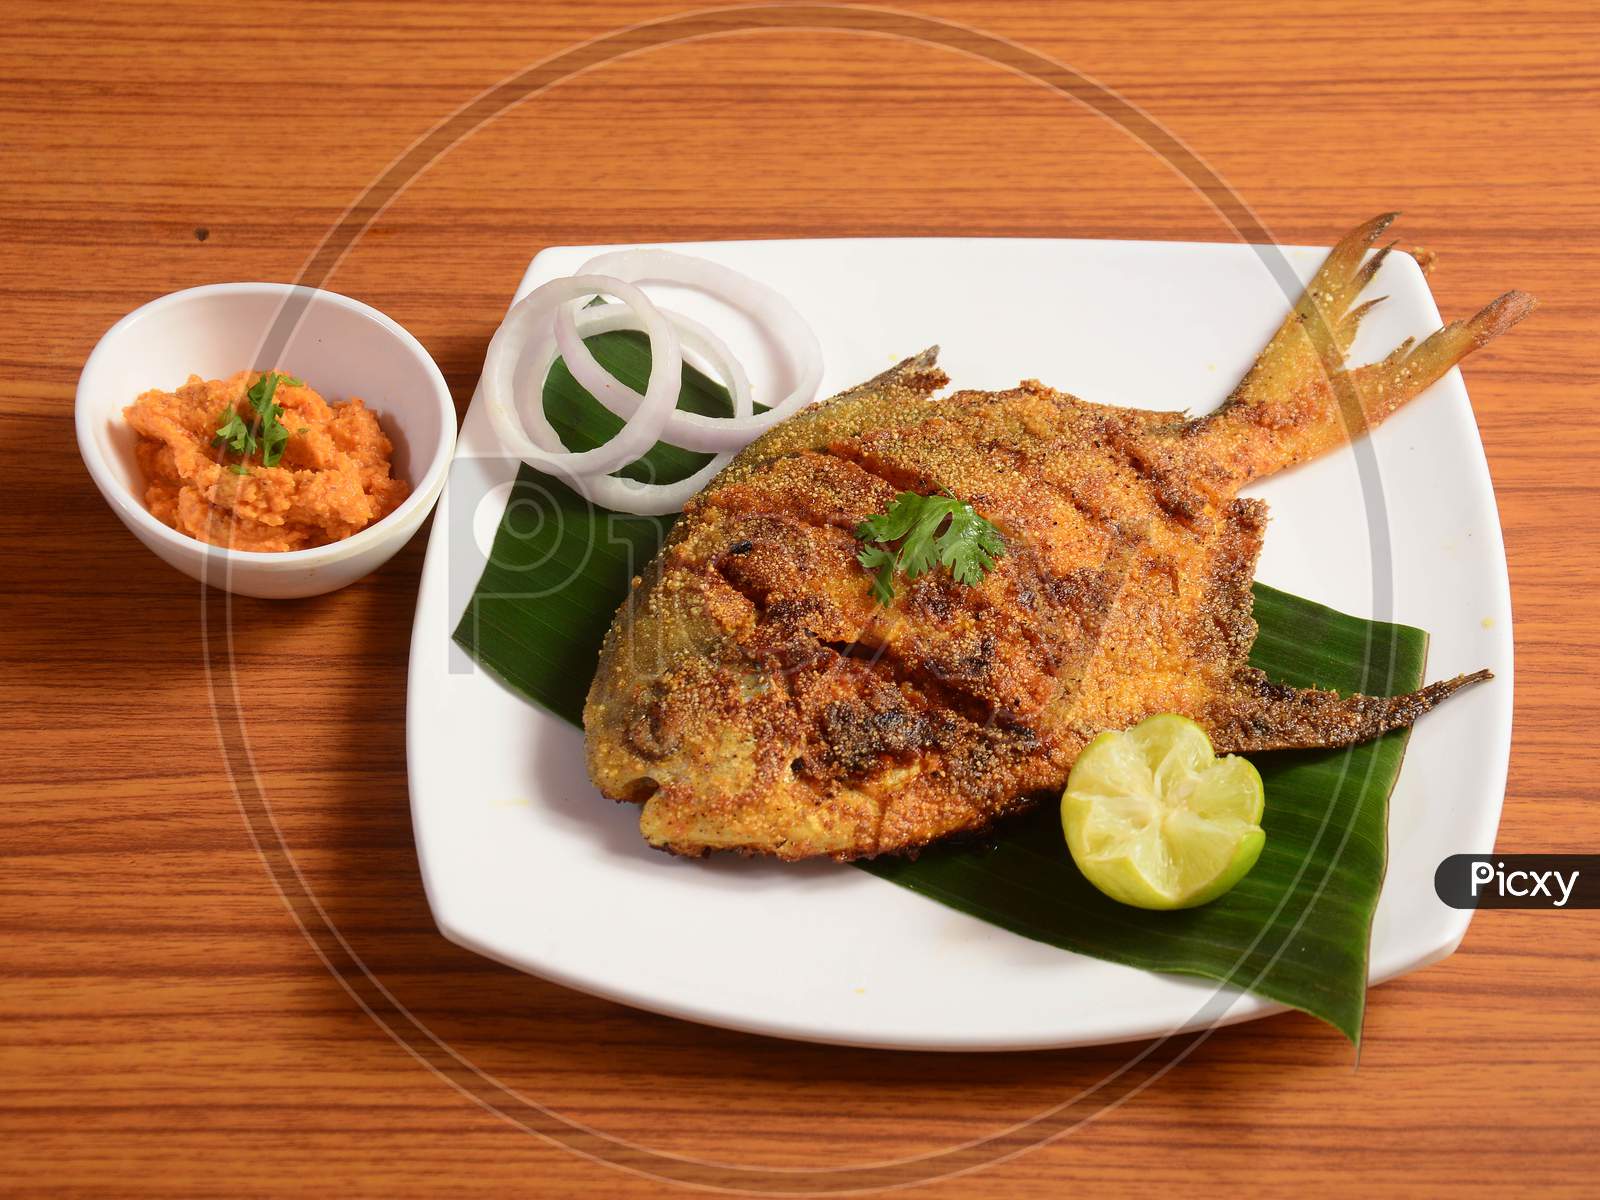 Pomfret Fish Tawa Fry Garnished With Lemon And Onion In A White Ceramic Plate With Wooden Background,Selective Focus